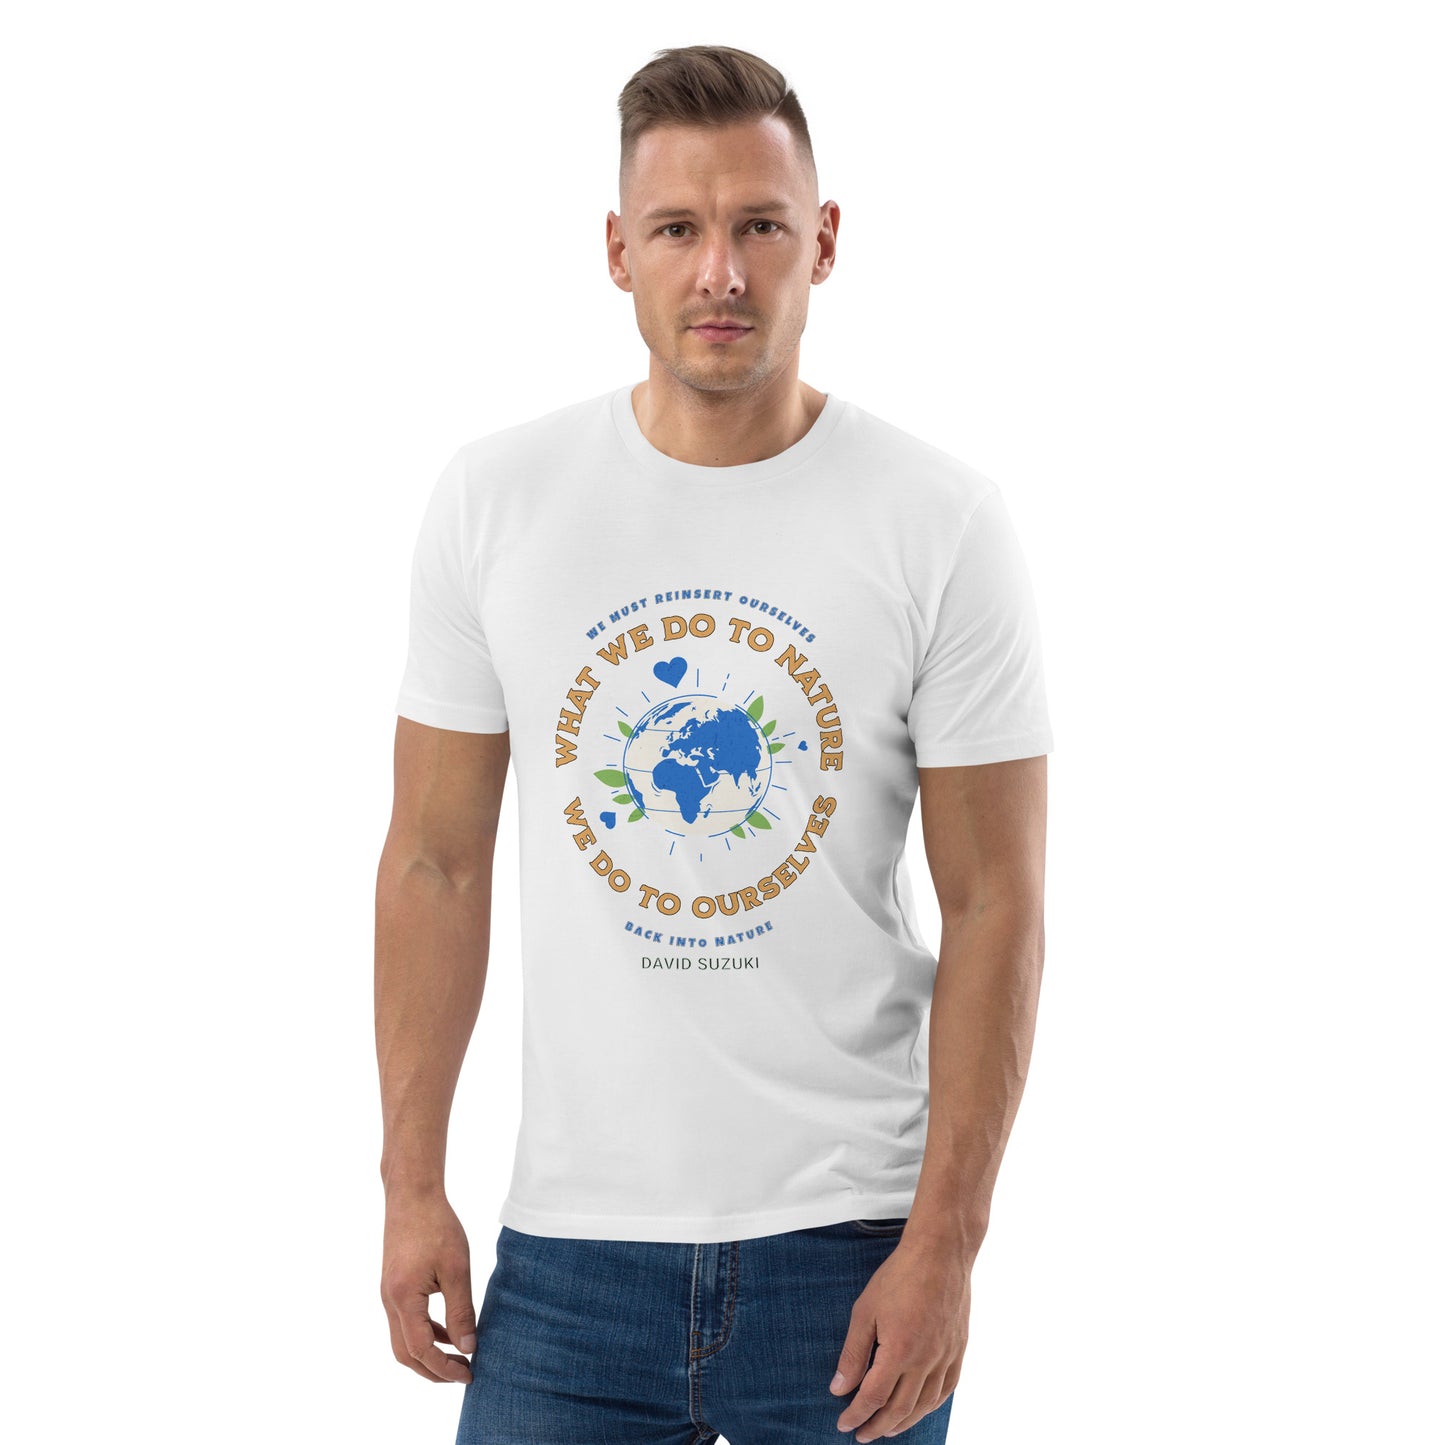 Unisex organic cotton t-shirt - Whatever We Do To Nature, We Do To Ourselves (D Suzuki)